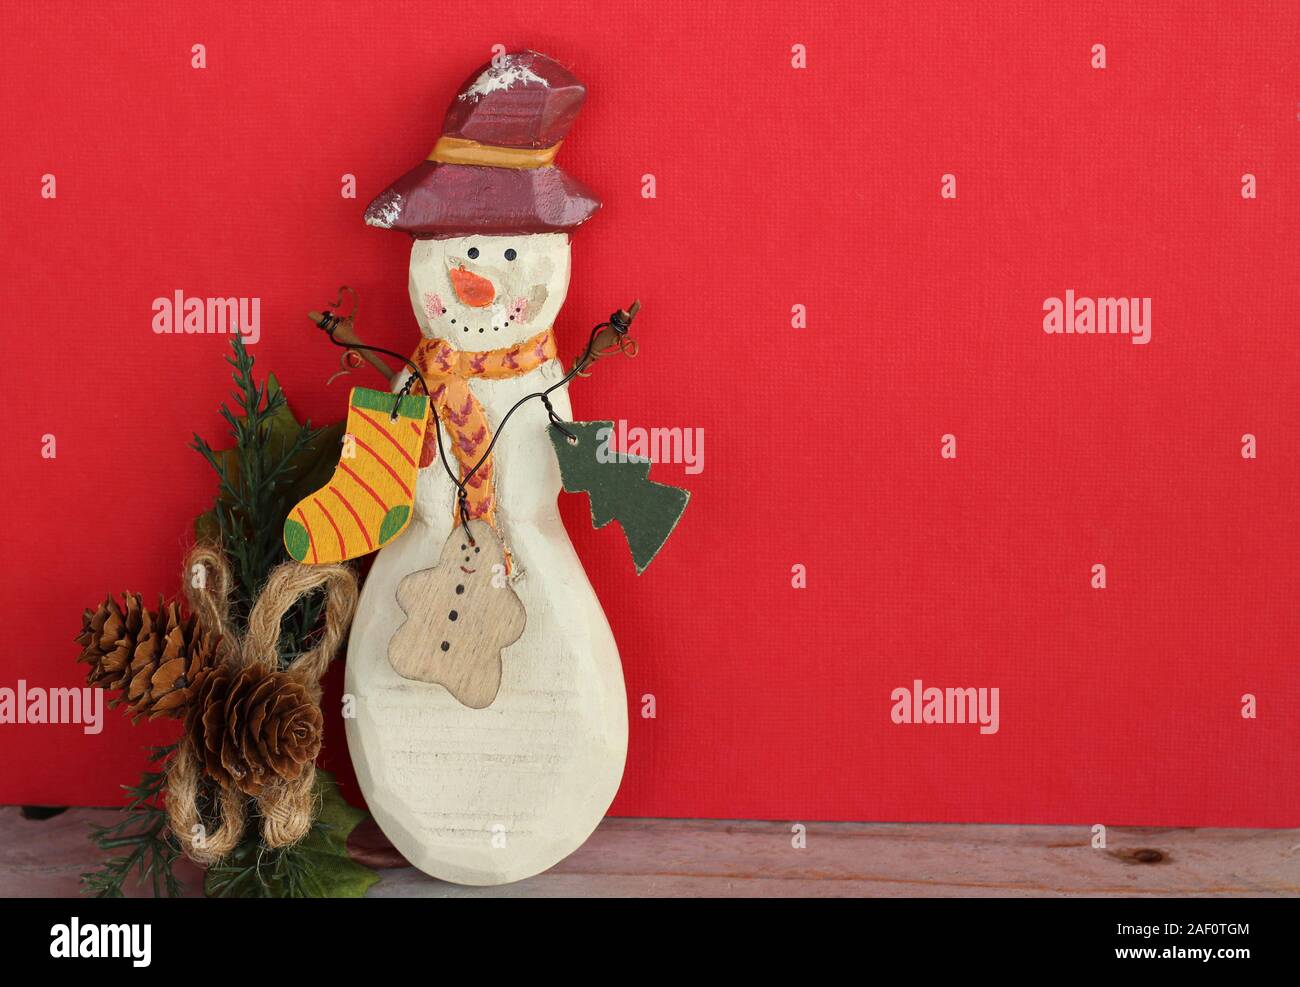 wooden decorated primitive snowman with a red hat and decorated scarf standing on a red background with copy space Stock Photo